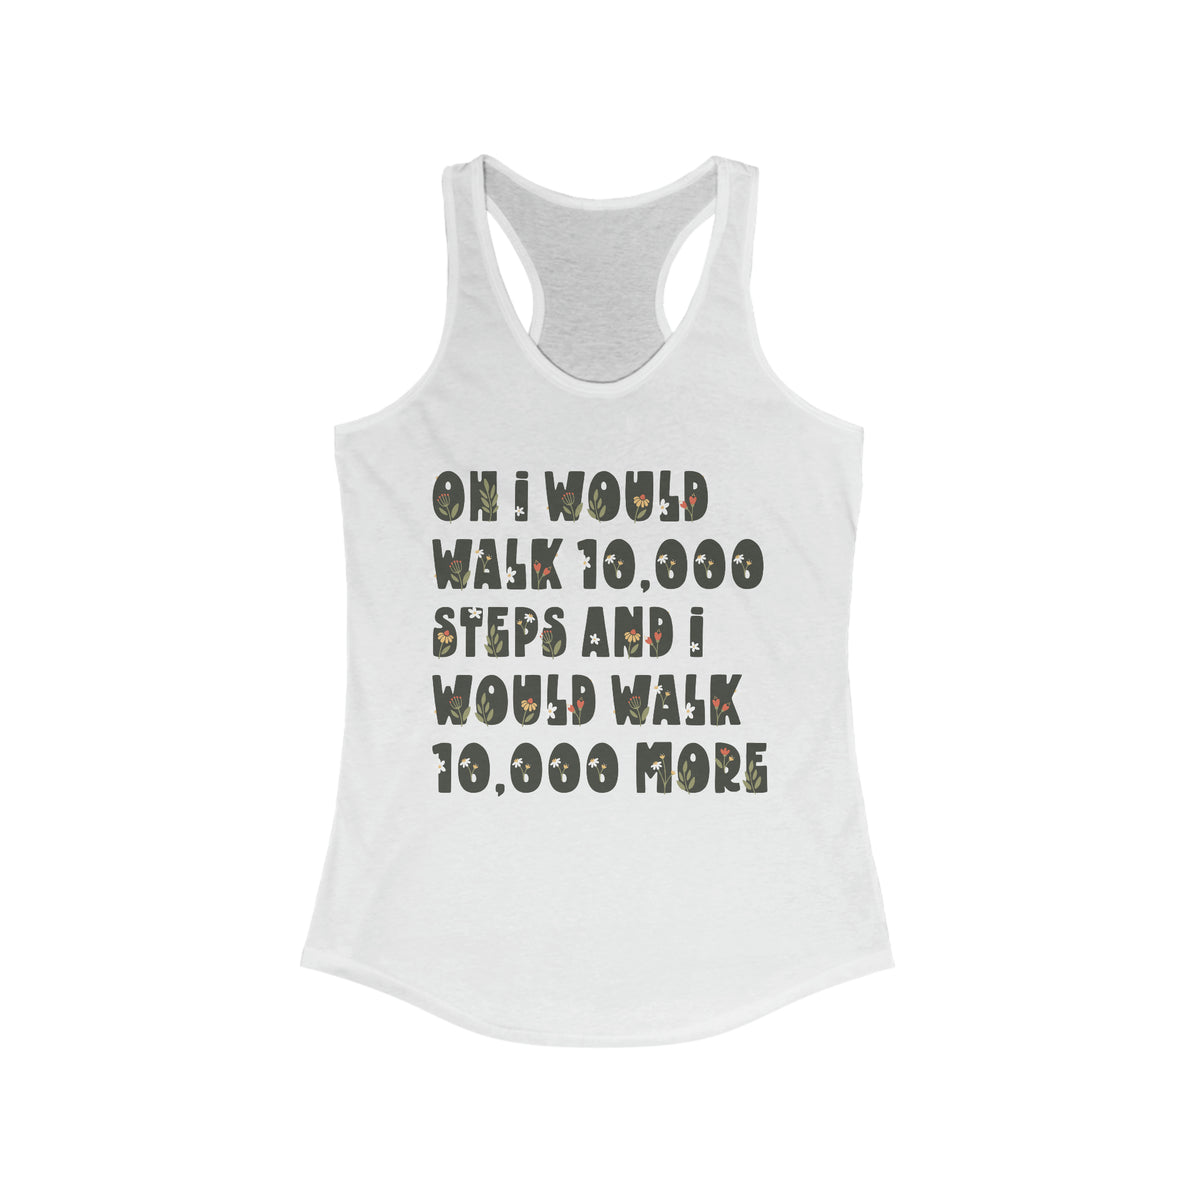 10,000 Steps Funny Fitness Tracker Shirt | Walking Workout Shirt | Gift For Her | Women's Slim-fit Racerback Tank Top